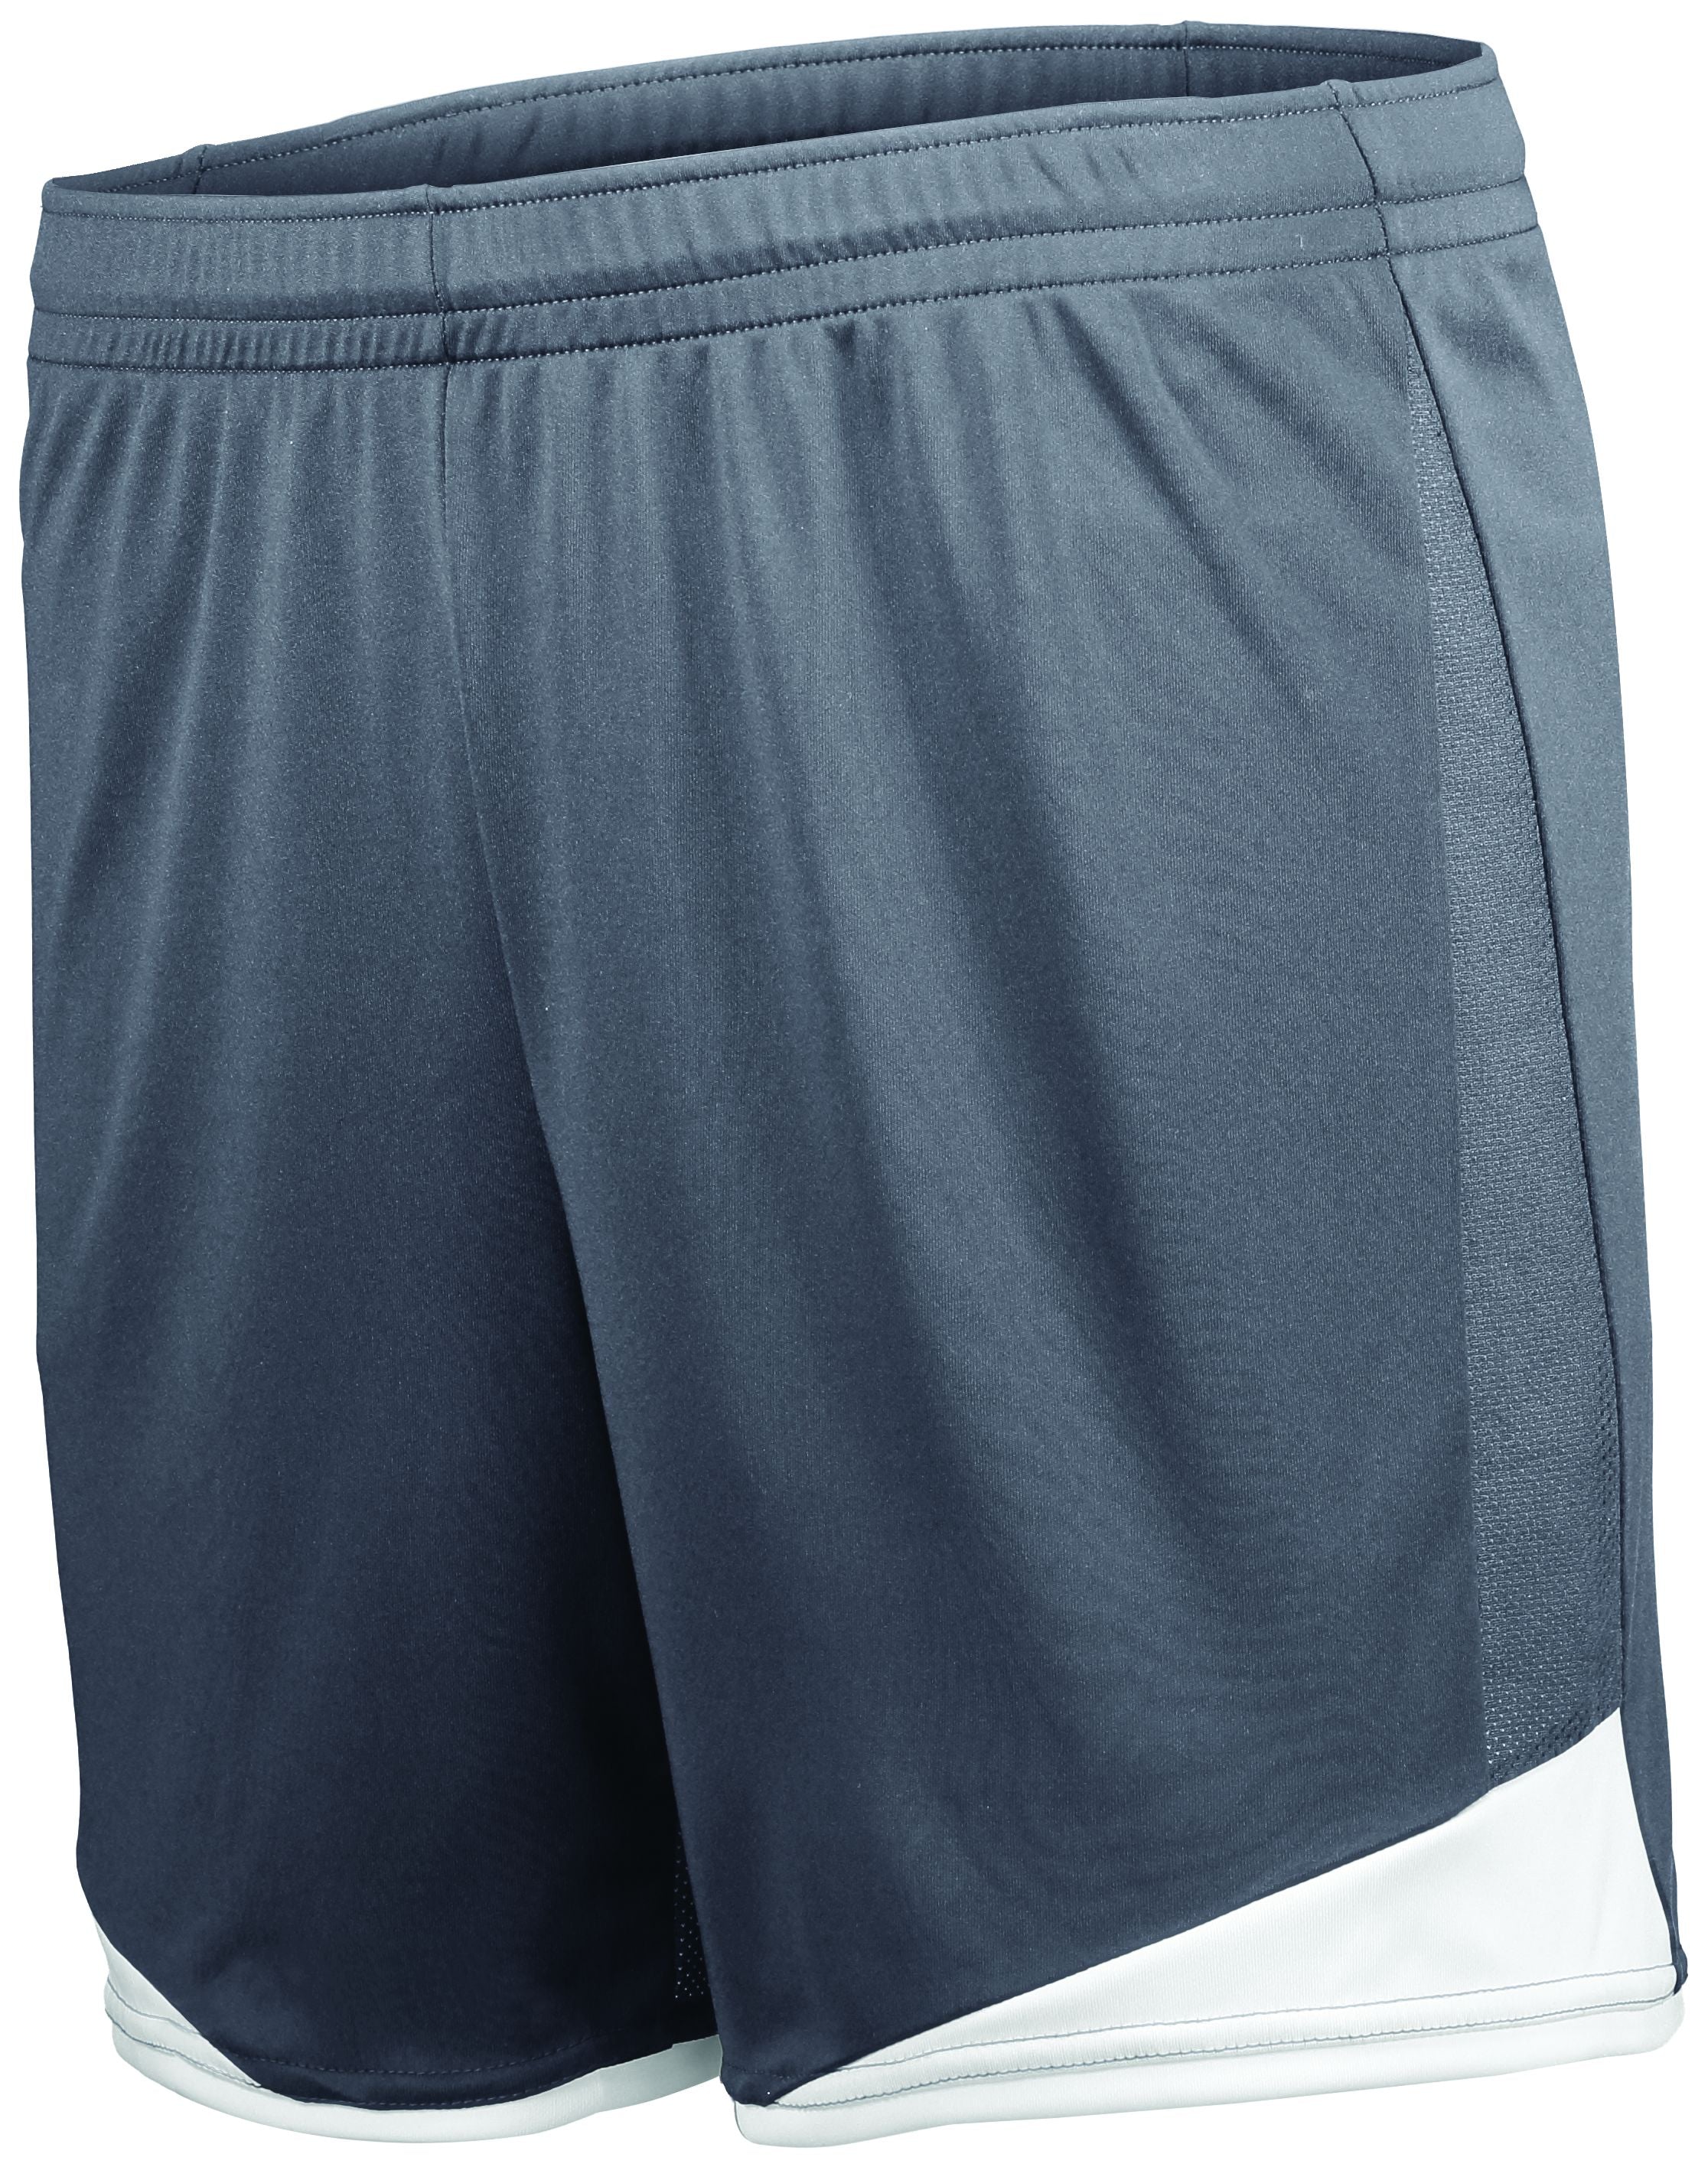 High 5 Ladies Stamford Soccer Shorts in Graphite/White  -Part of the Ladies, Ladies-Shorts, High5-Products, Soccer, All-Sports-1 product lines at KanaleyCreations.com